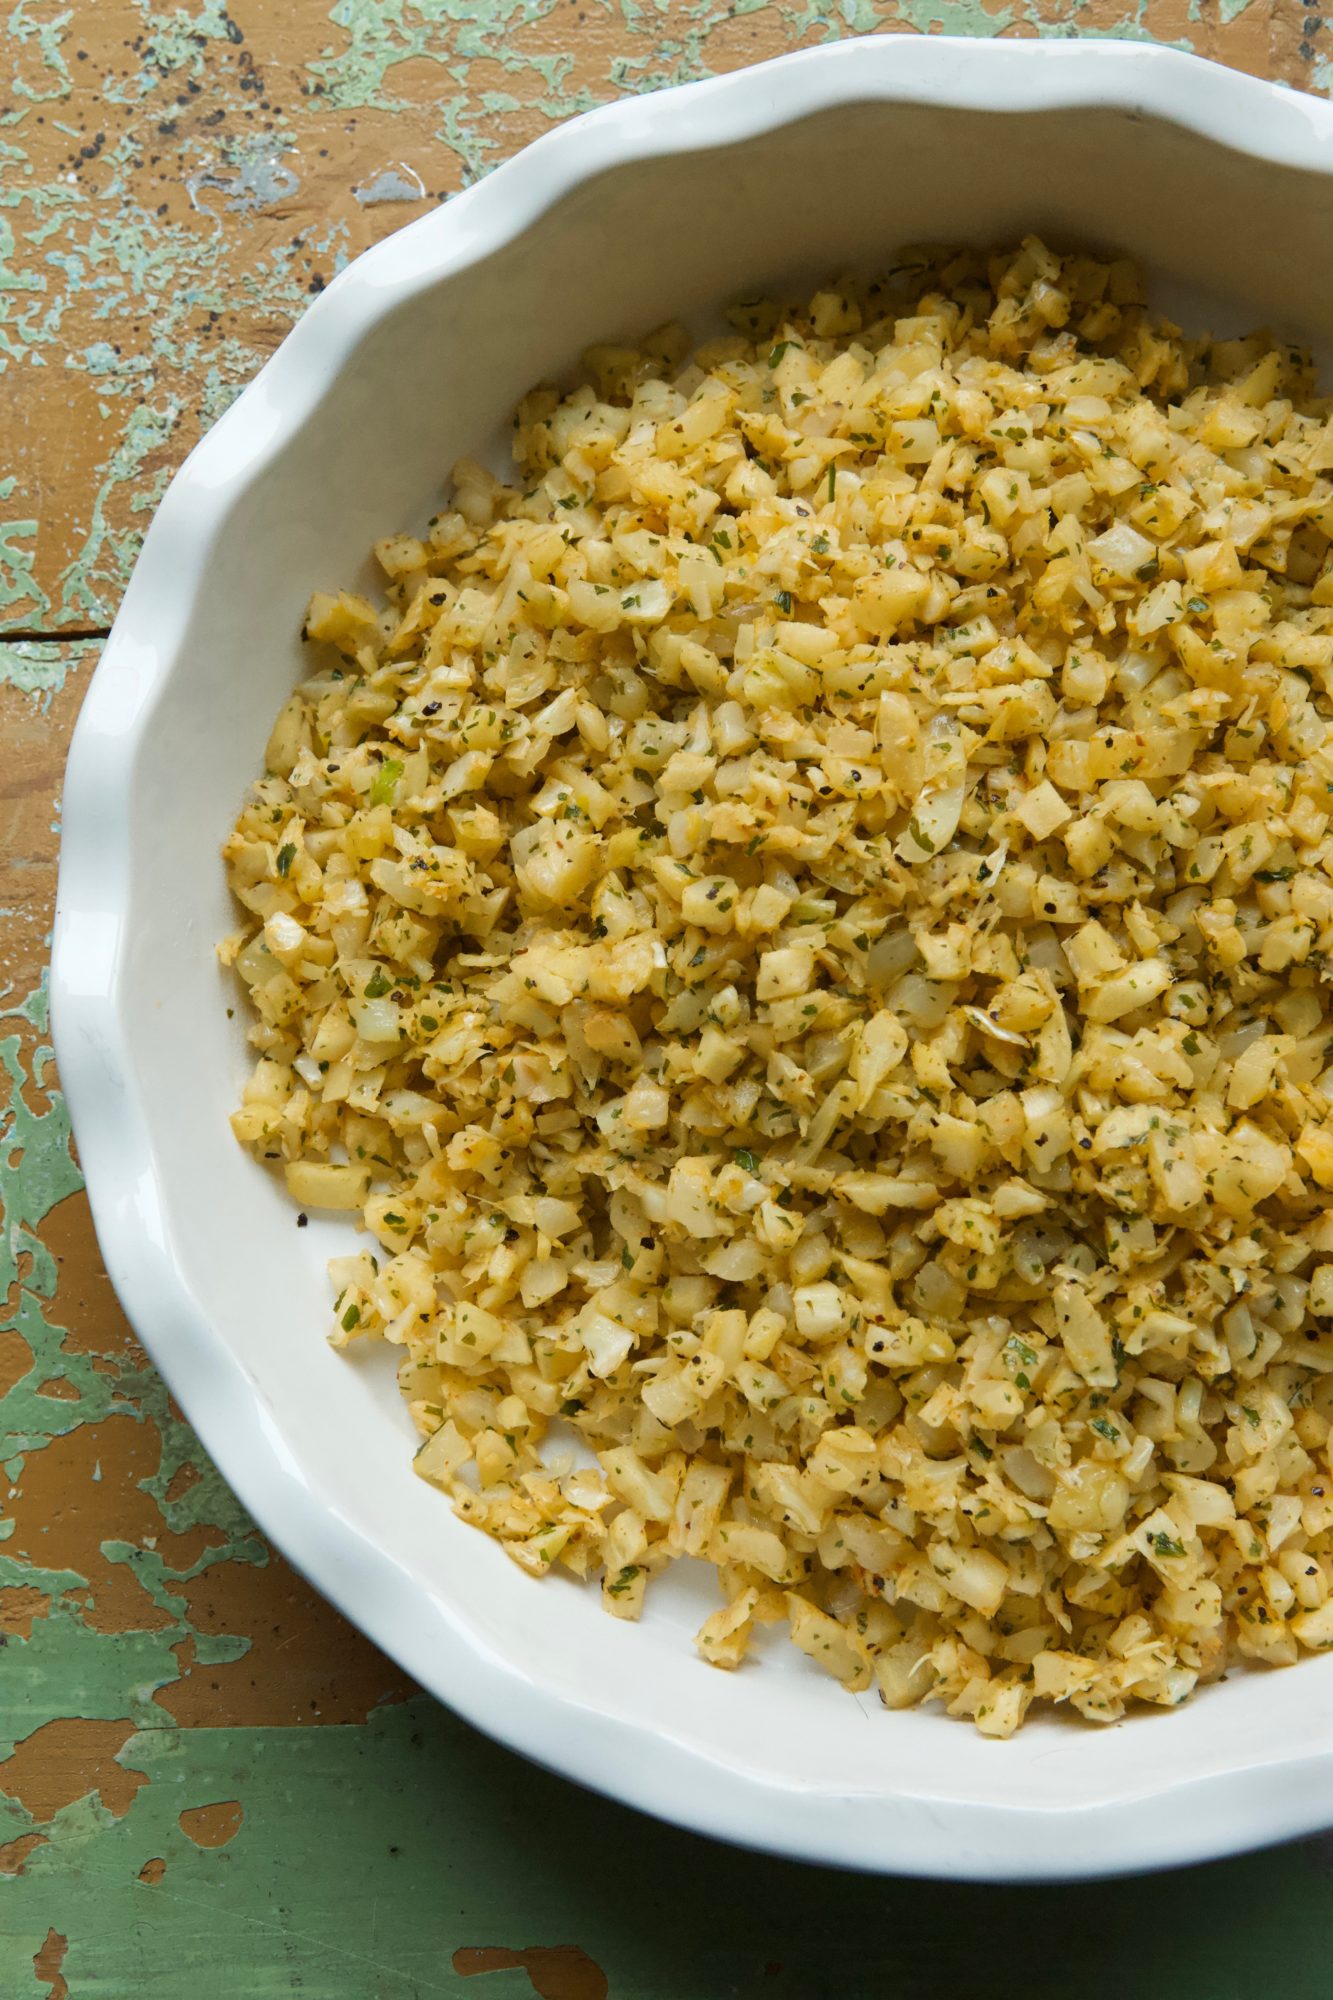 In just 15 minutes you can have this gluten free/grain free Buttery Lemon Garlic Cauliflower Rice on the table. A great side dish and the perfect alternative to heavy carbs. MarlaMeridith.com